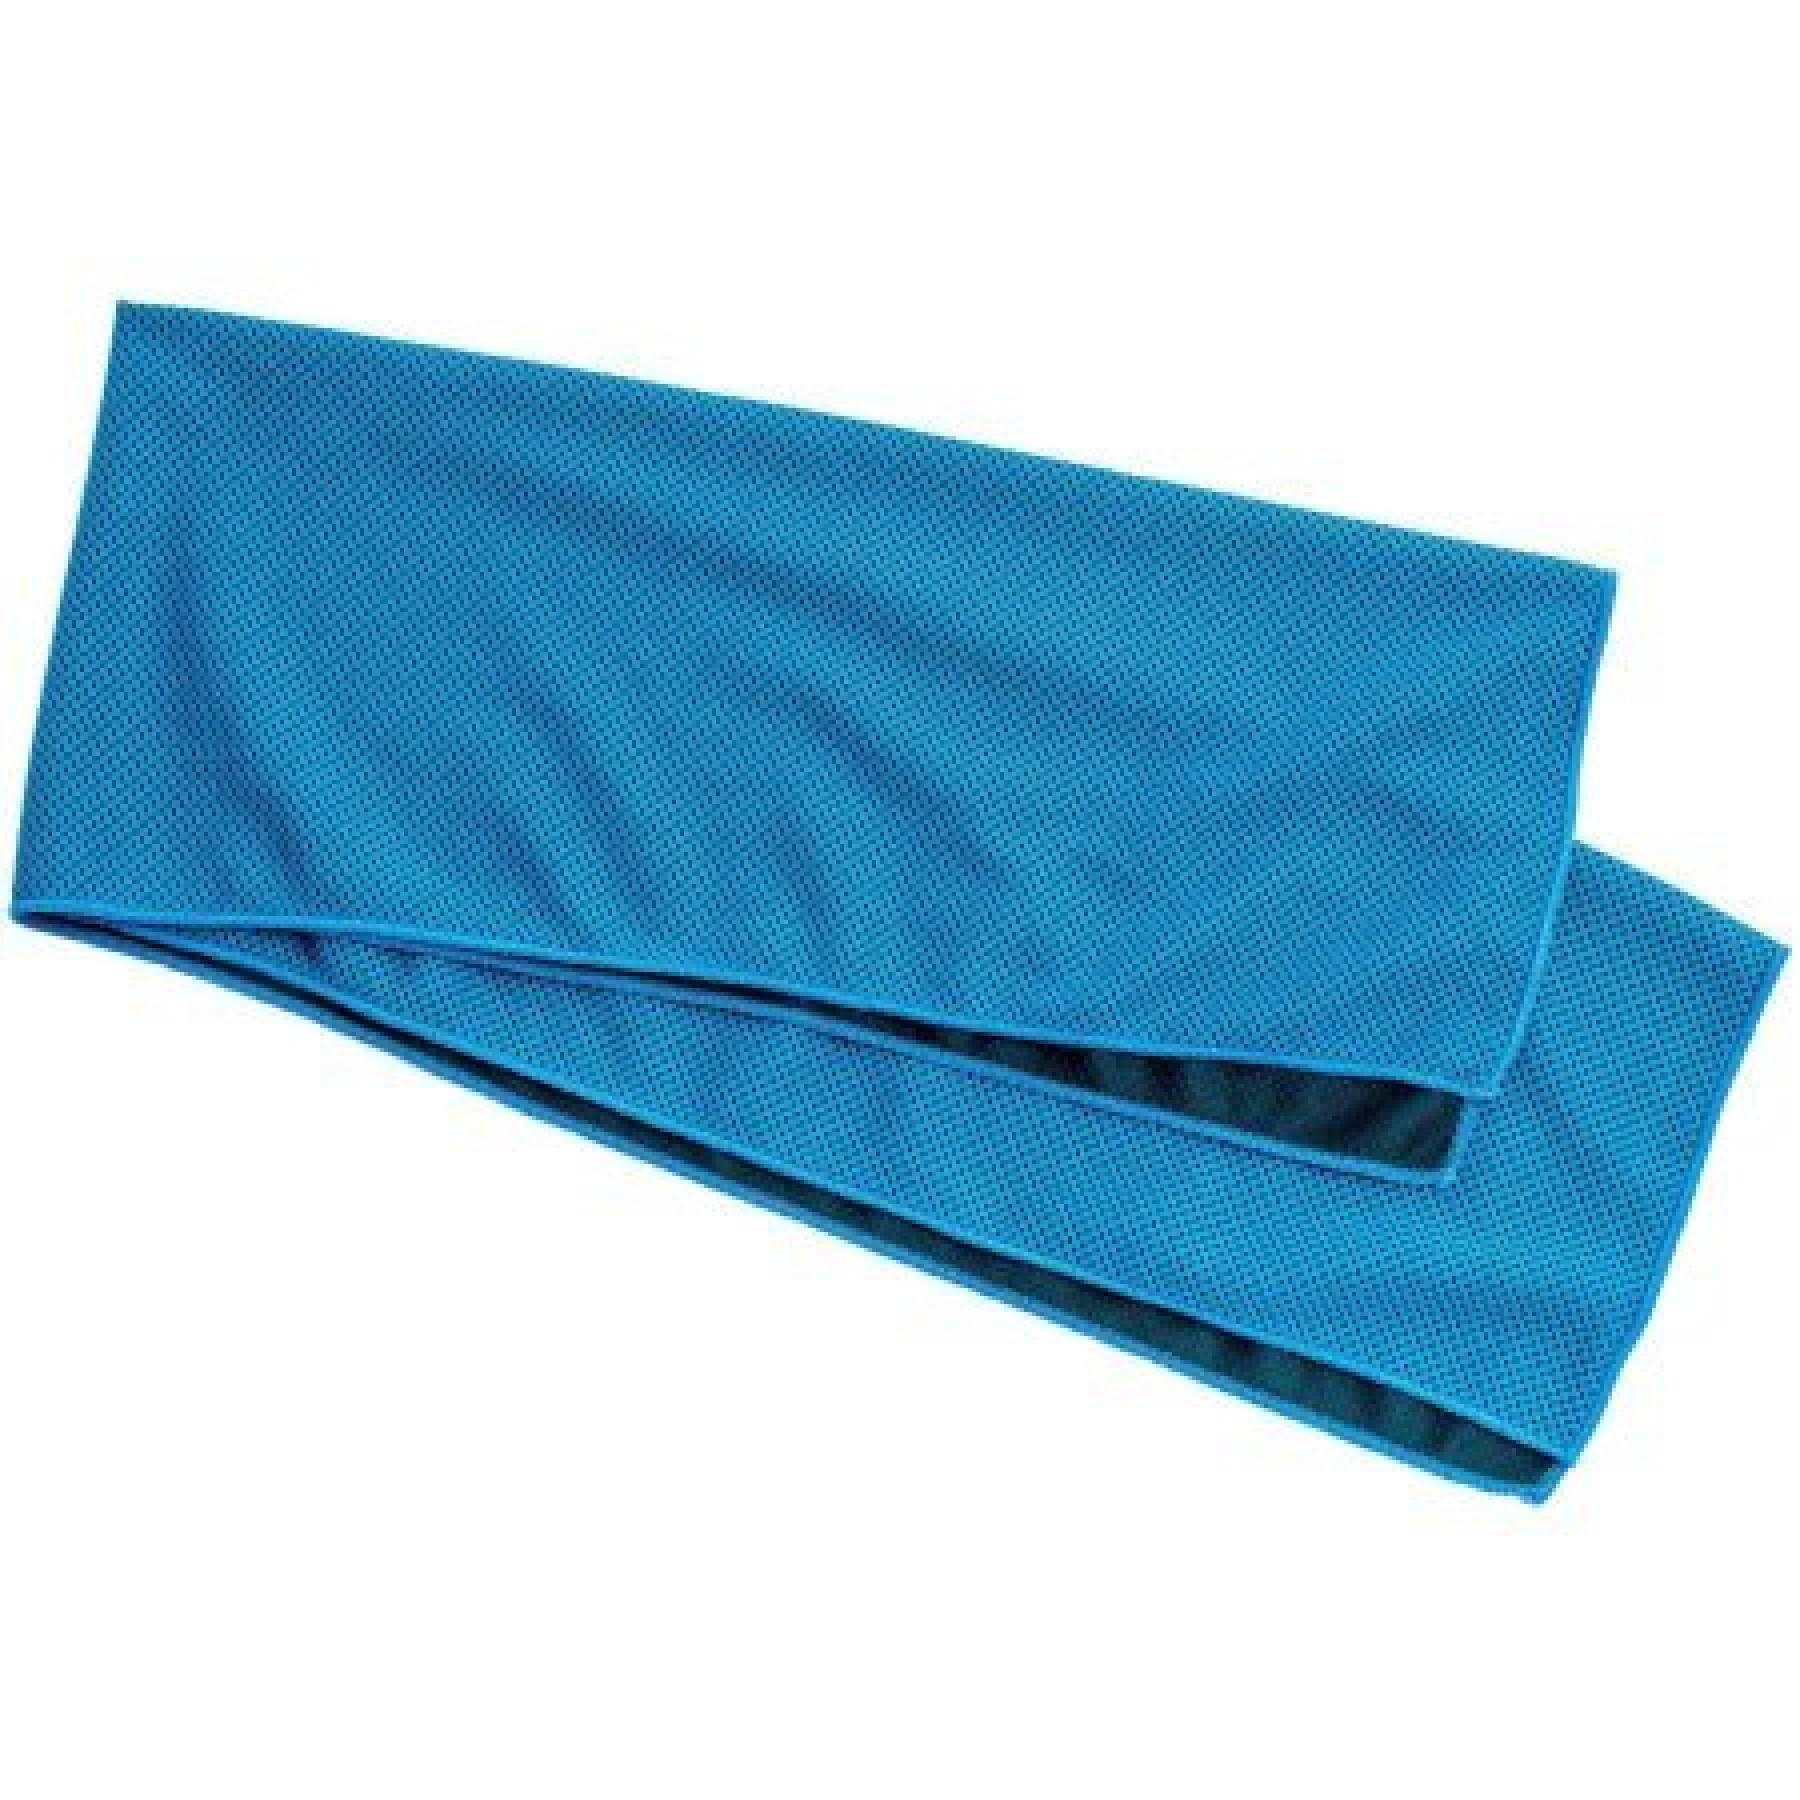 Towel Perfect Fitness Cooling Pro